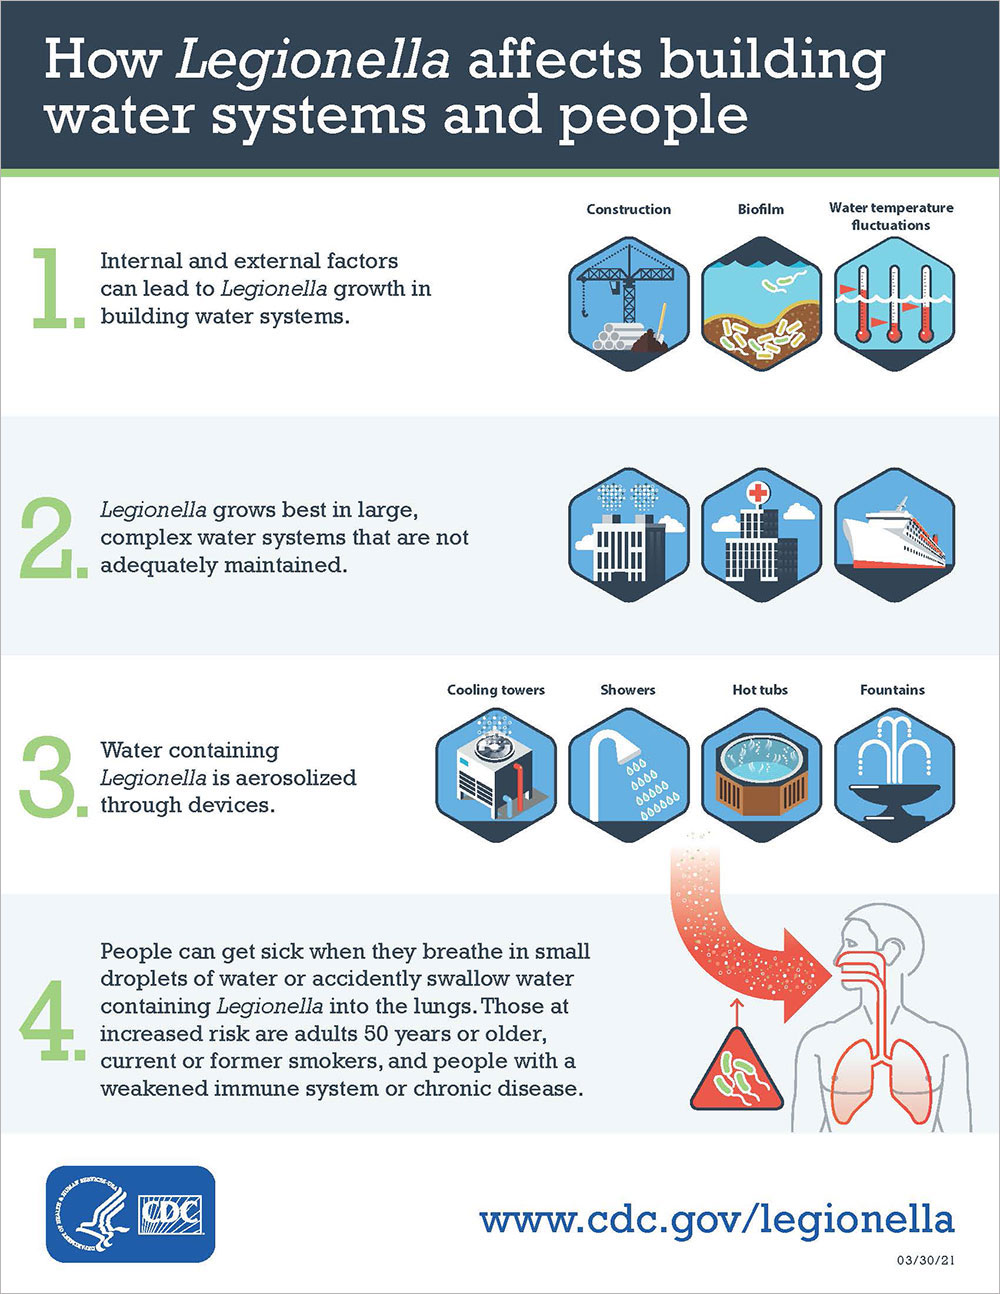 How Legionella Affects Building Water Systems and People Infographic.